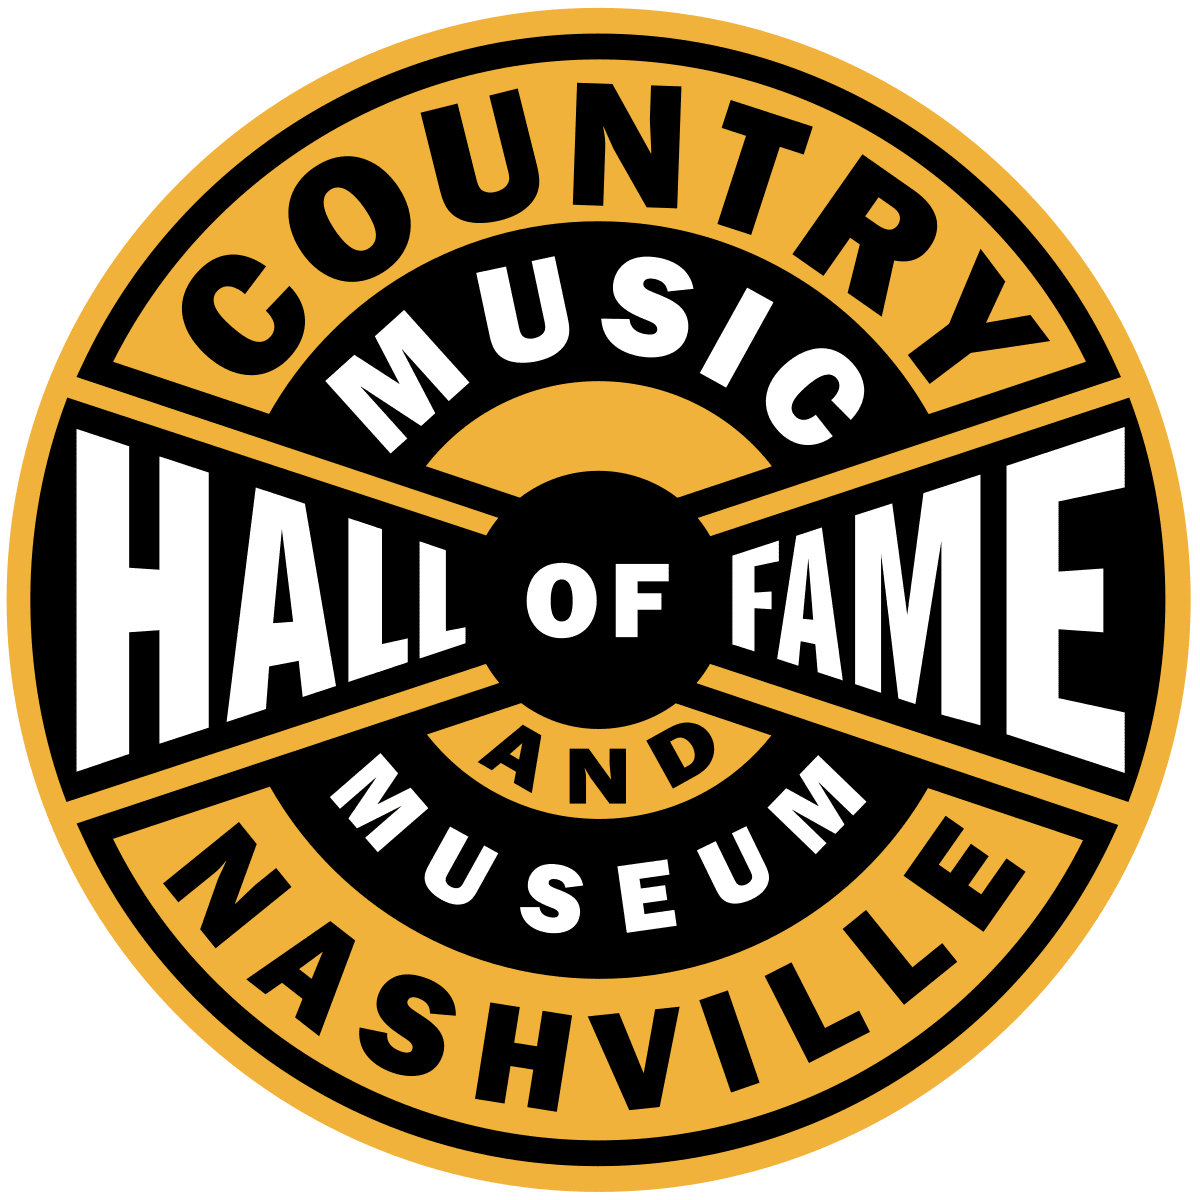 Country Music Hall of Fame and Museum, Nashville, Tennessee